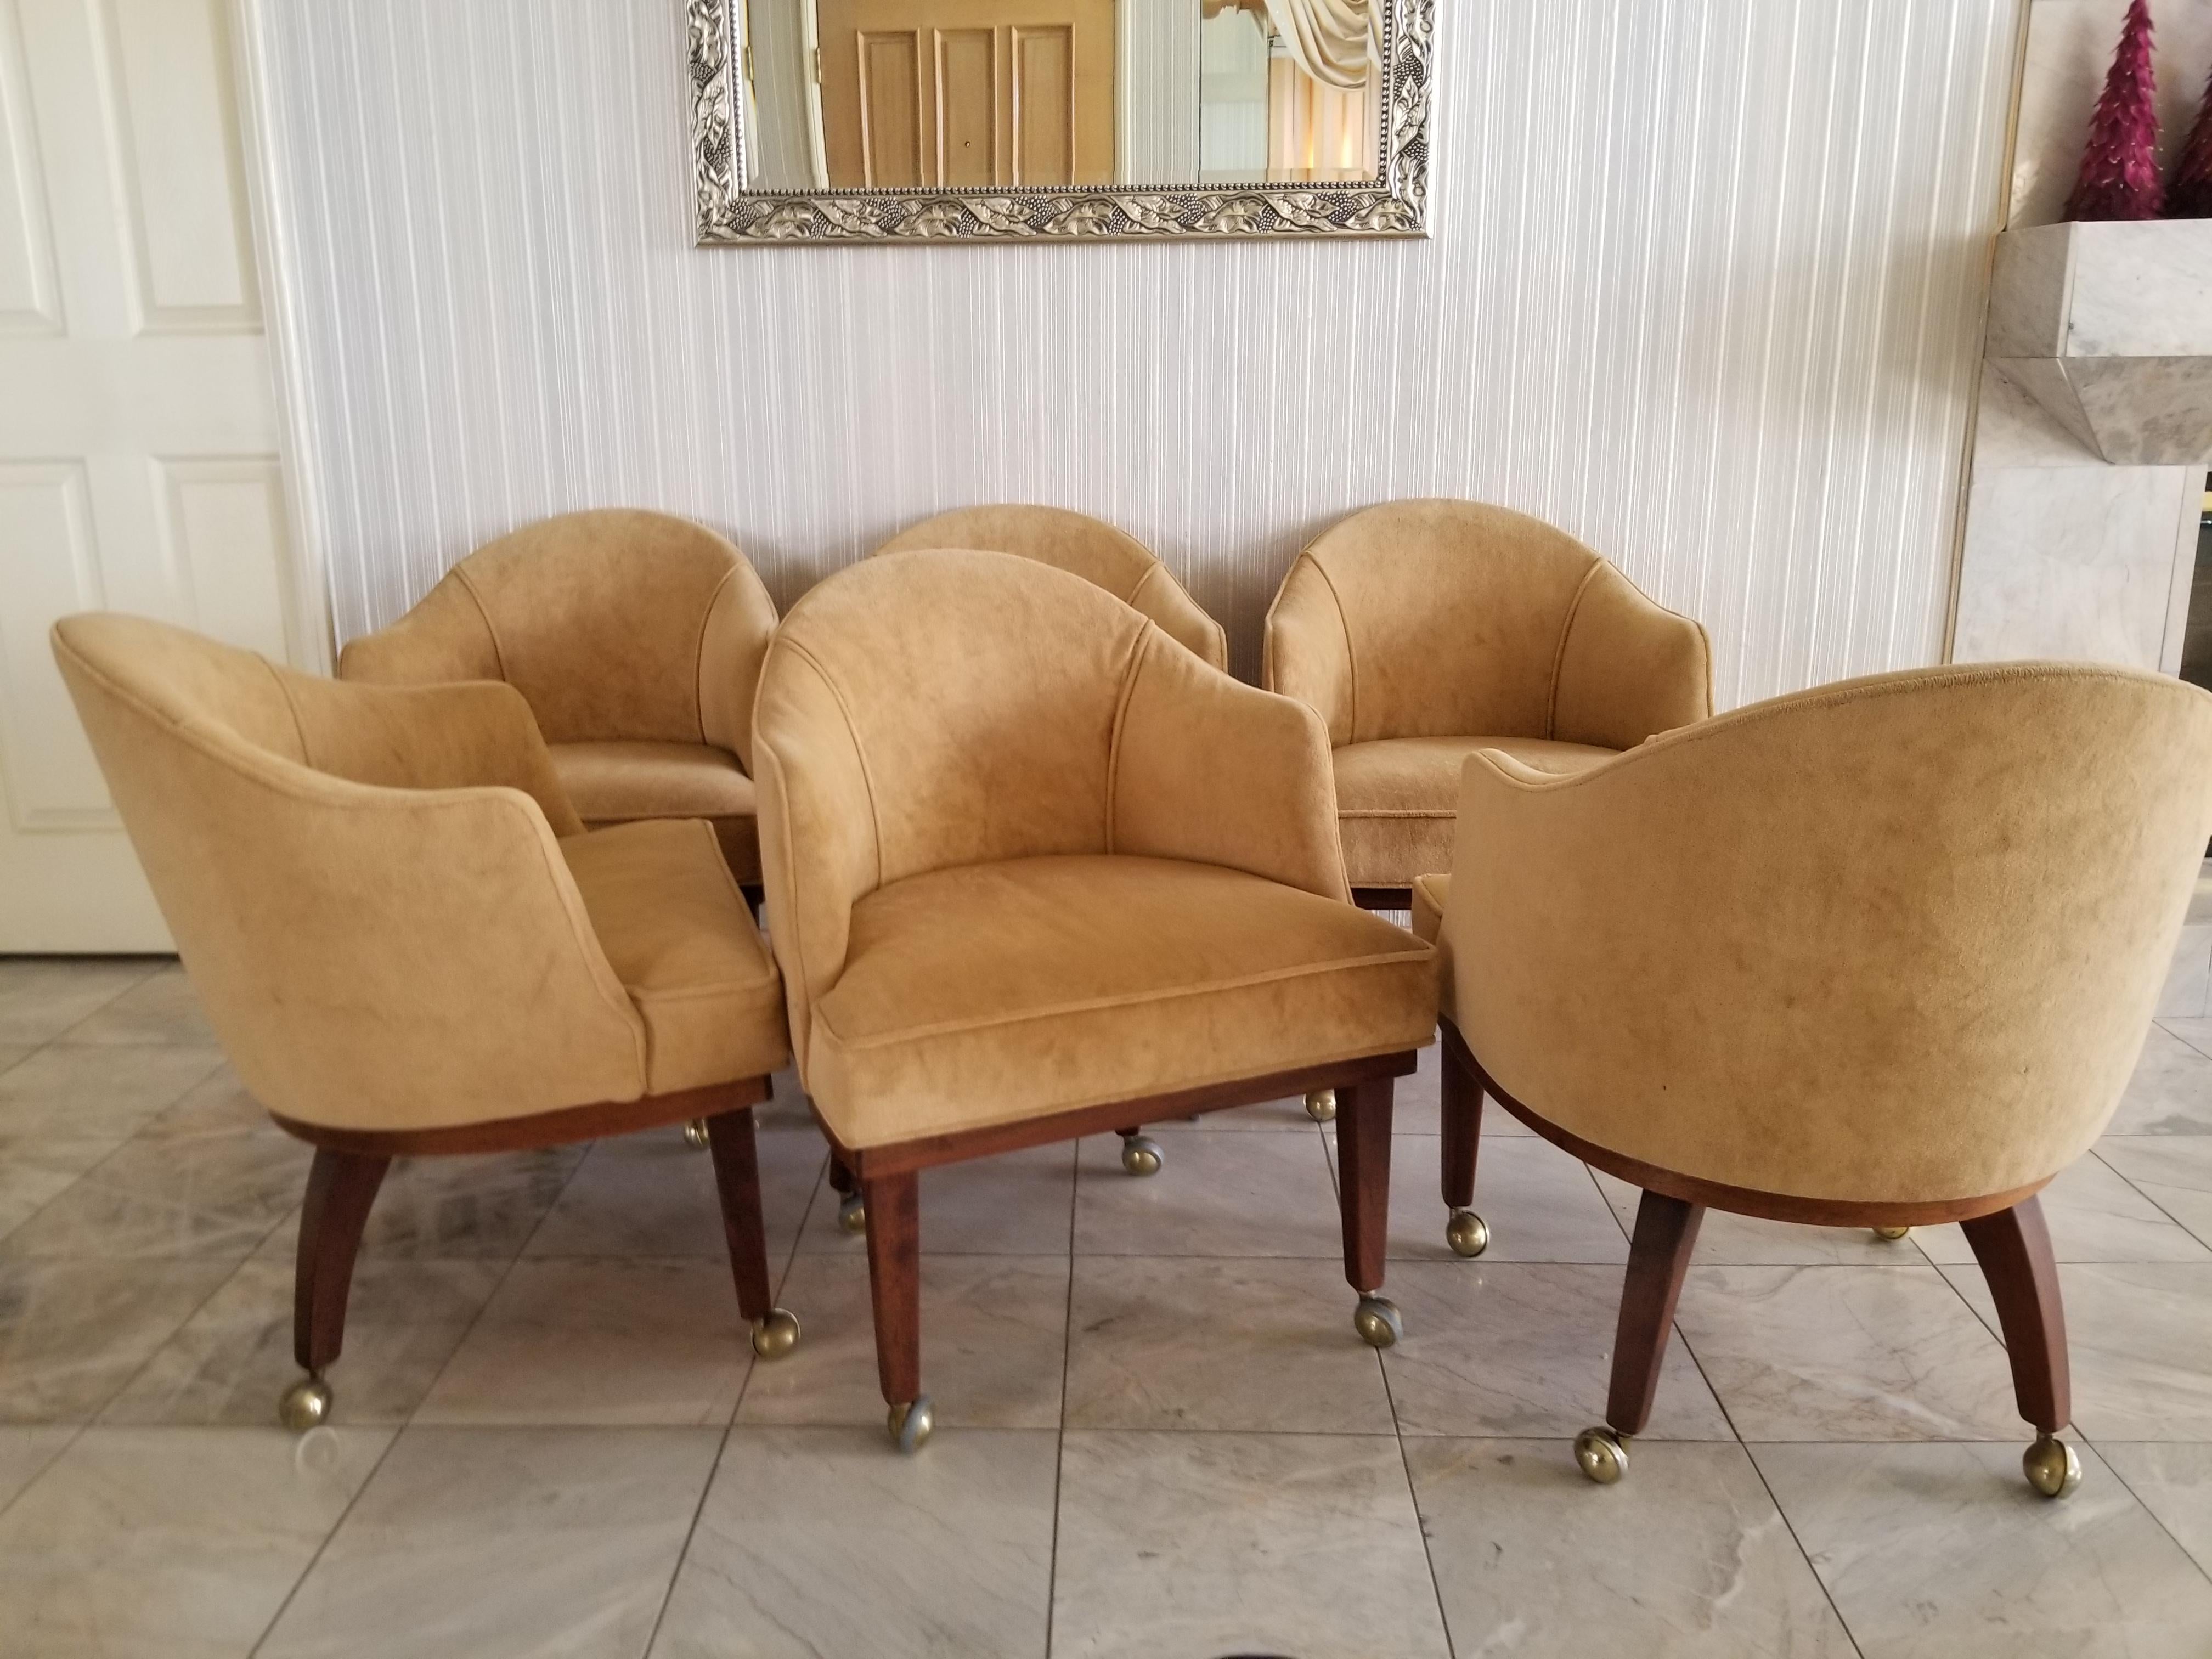 Quintessential California Fun Lifestyle with CHET BEARDSLEY Set of Six Curved Barrel Back Chairs 1960s
Golden Tan Fabric on Rich Walnut Wood.
Midcentury Modern Delight Ideal for Gaming, Lounging, Noshing Dining. Pure Fun.
Chair retains original